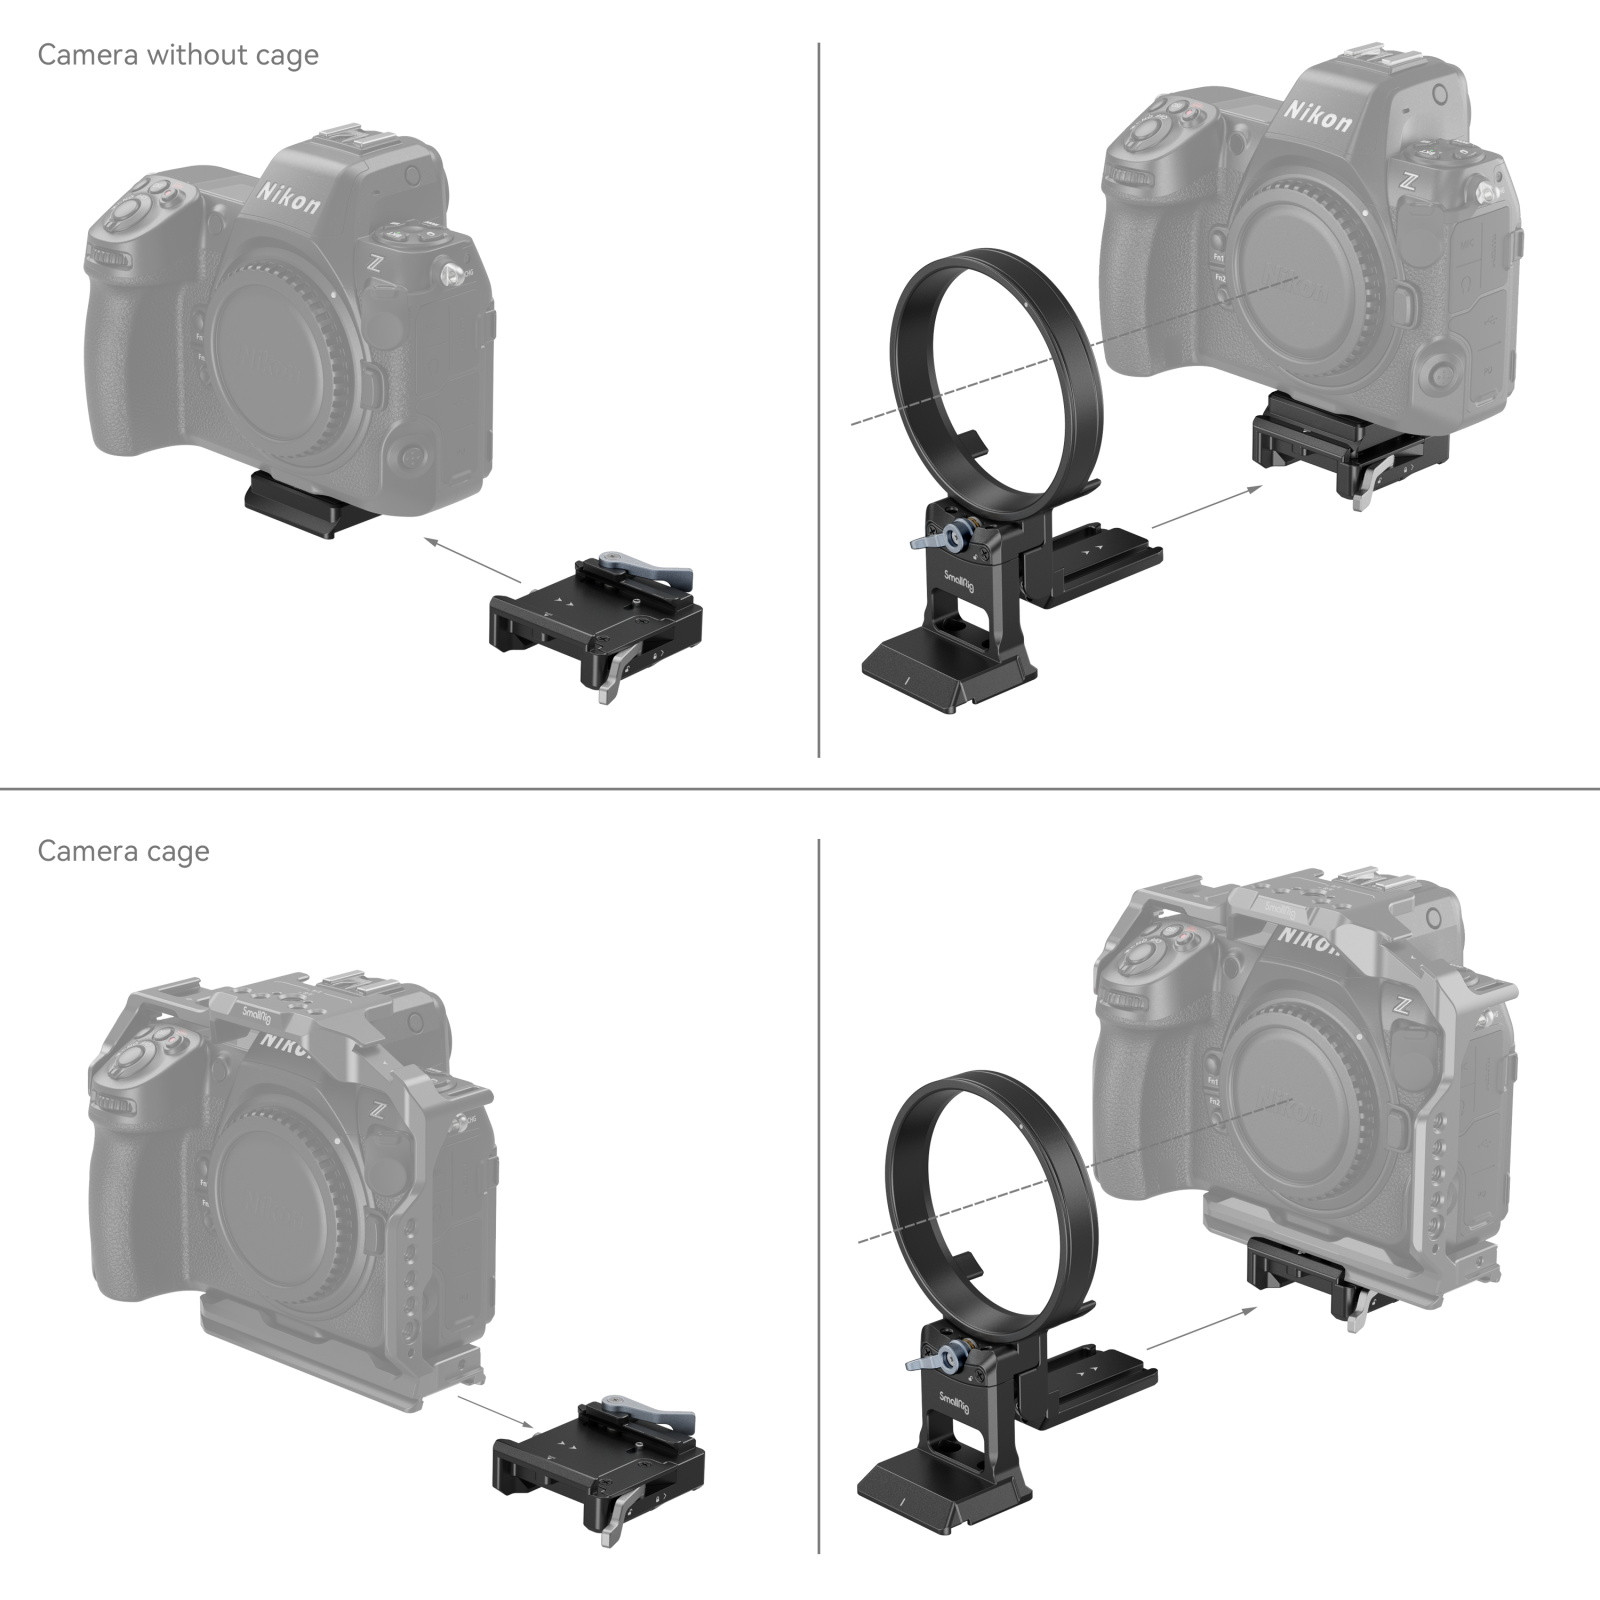 SmallRig Rotatable Horizontal-to-Vertical Mount Plate Kit for Nikon Specific Z Series Cameras 4306